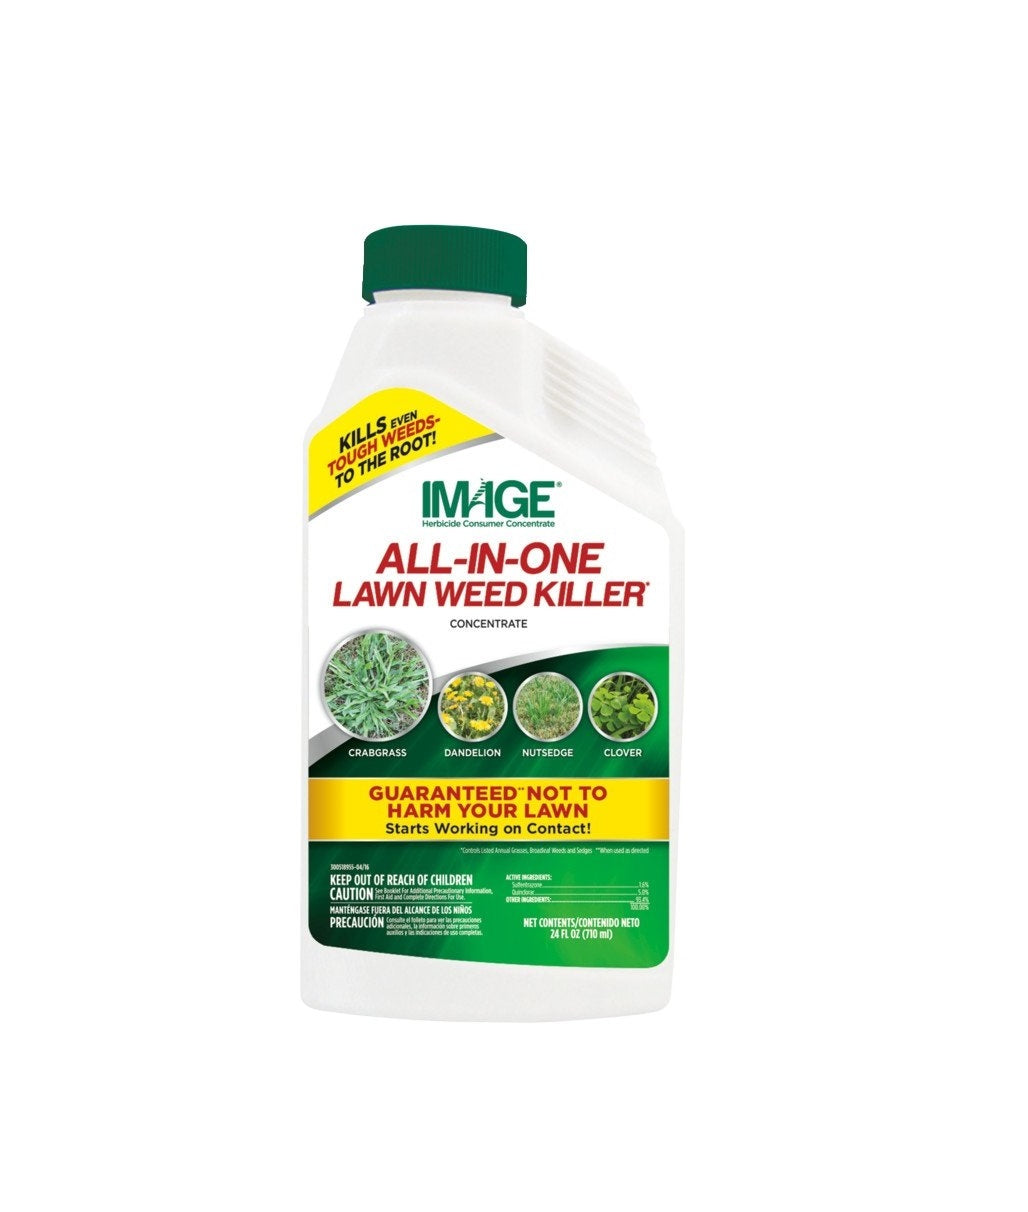 Image 100523495 All-In-One Lawn Weed Killer Concentrate, 24 Oz